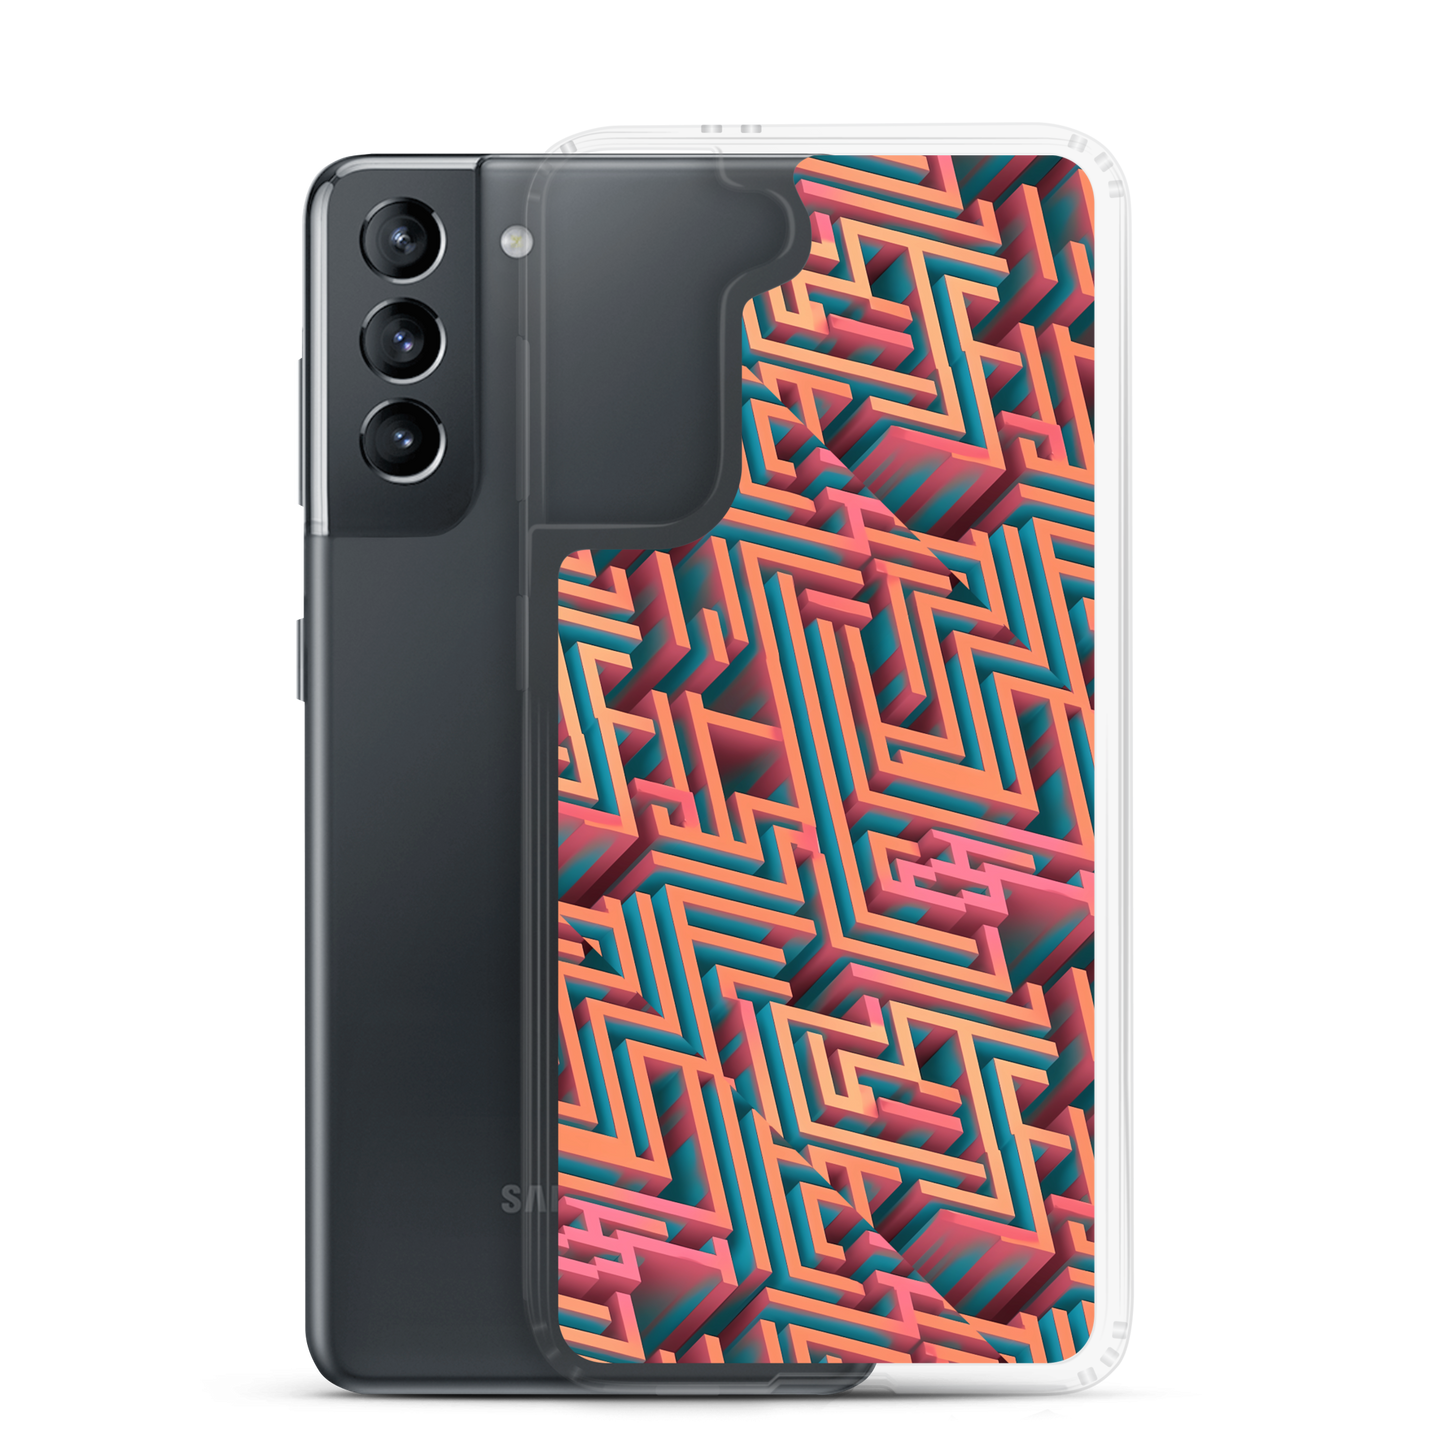 3D Maze Illusion | 3D Patterns | Clear Case for Samsung - #1